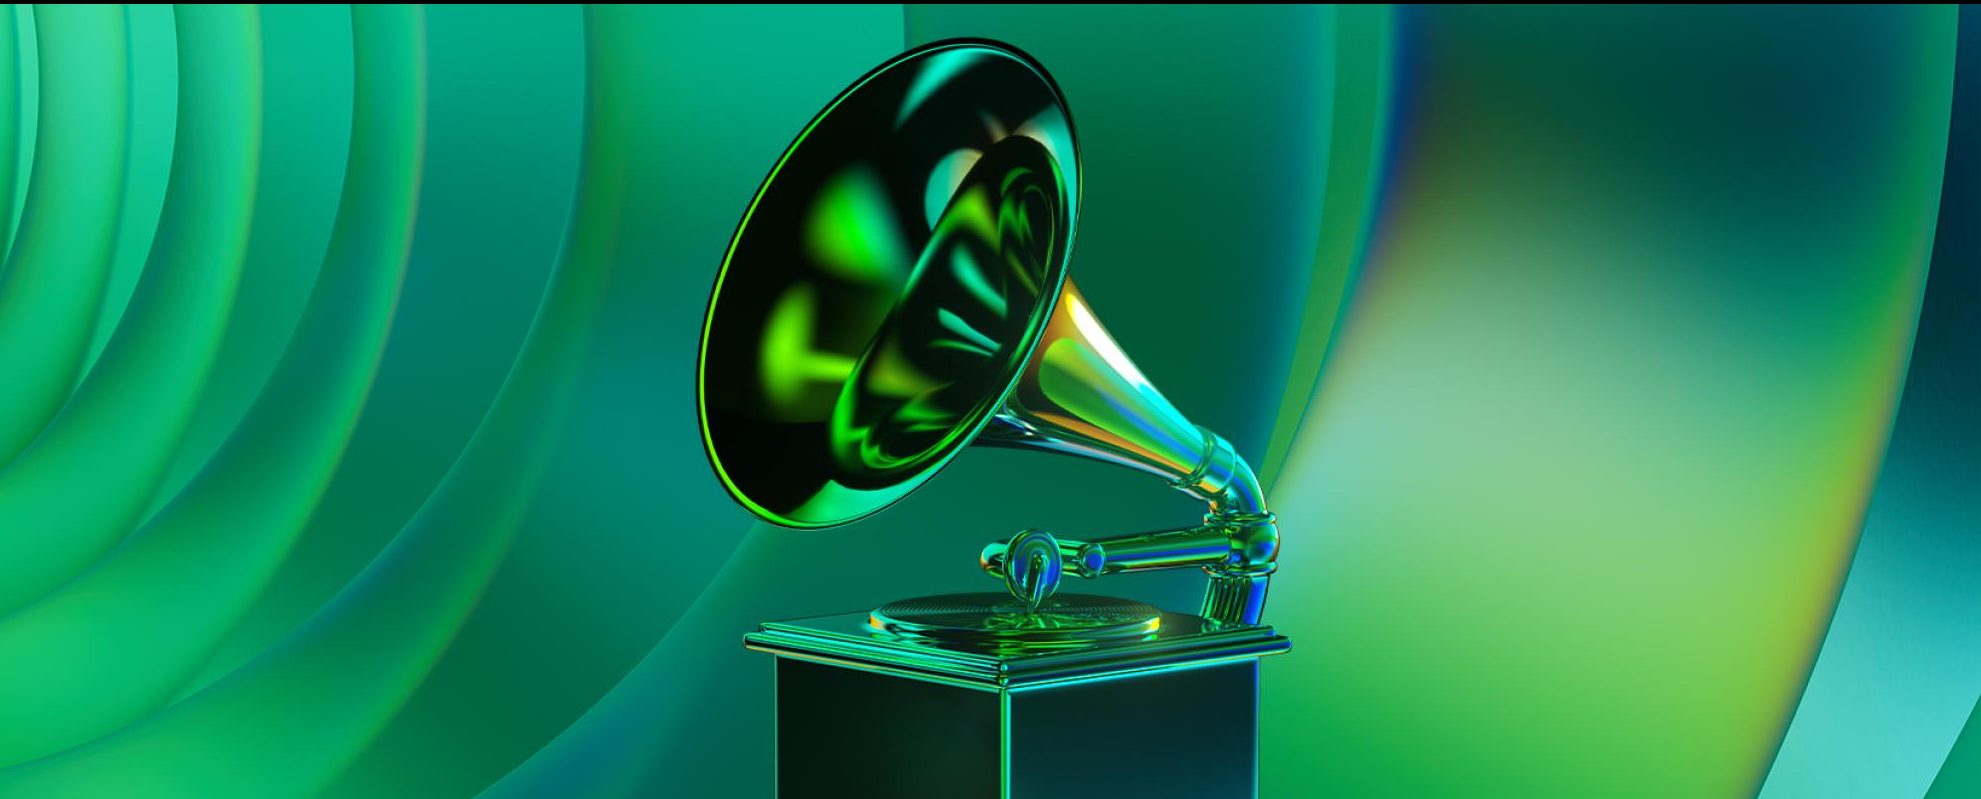 The 65th Annual Grammy Awards are Tonight